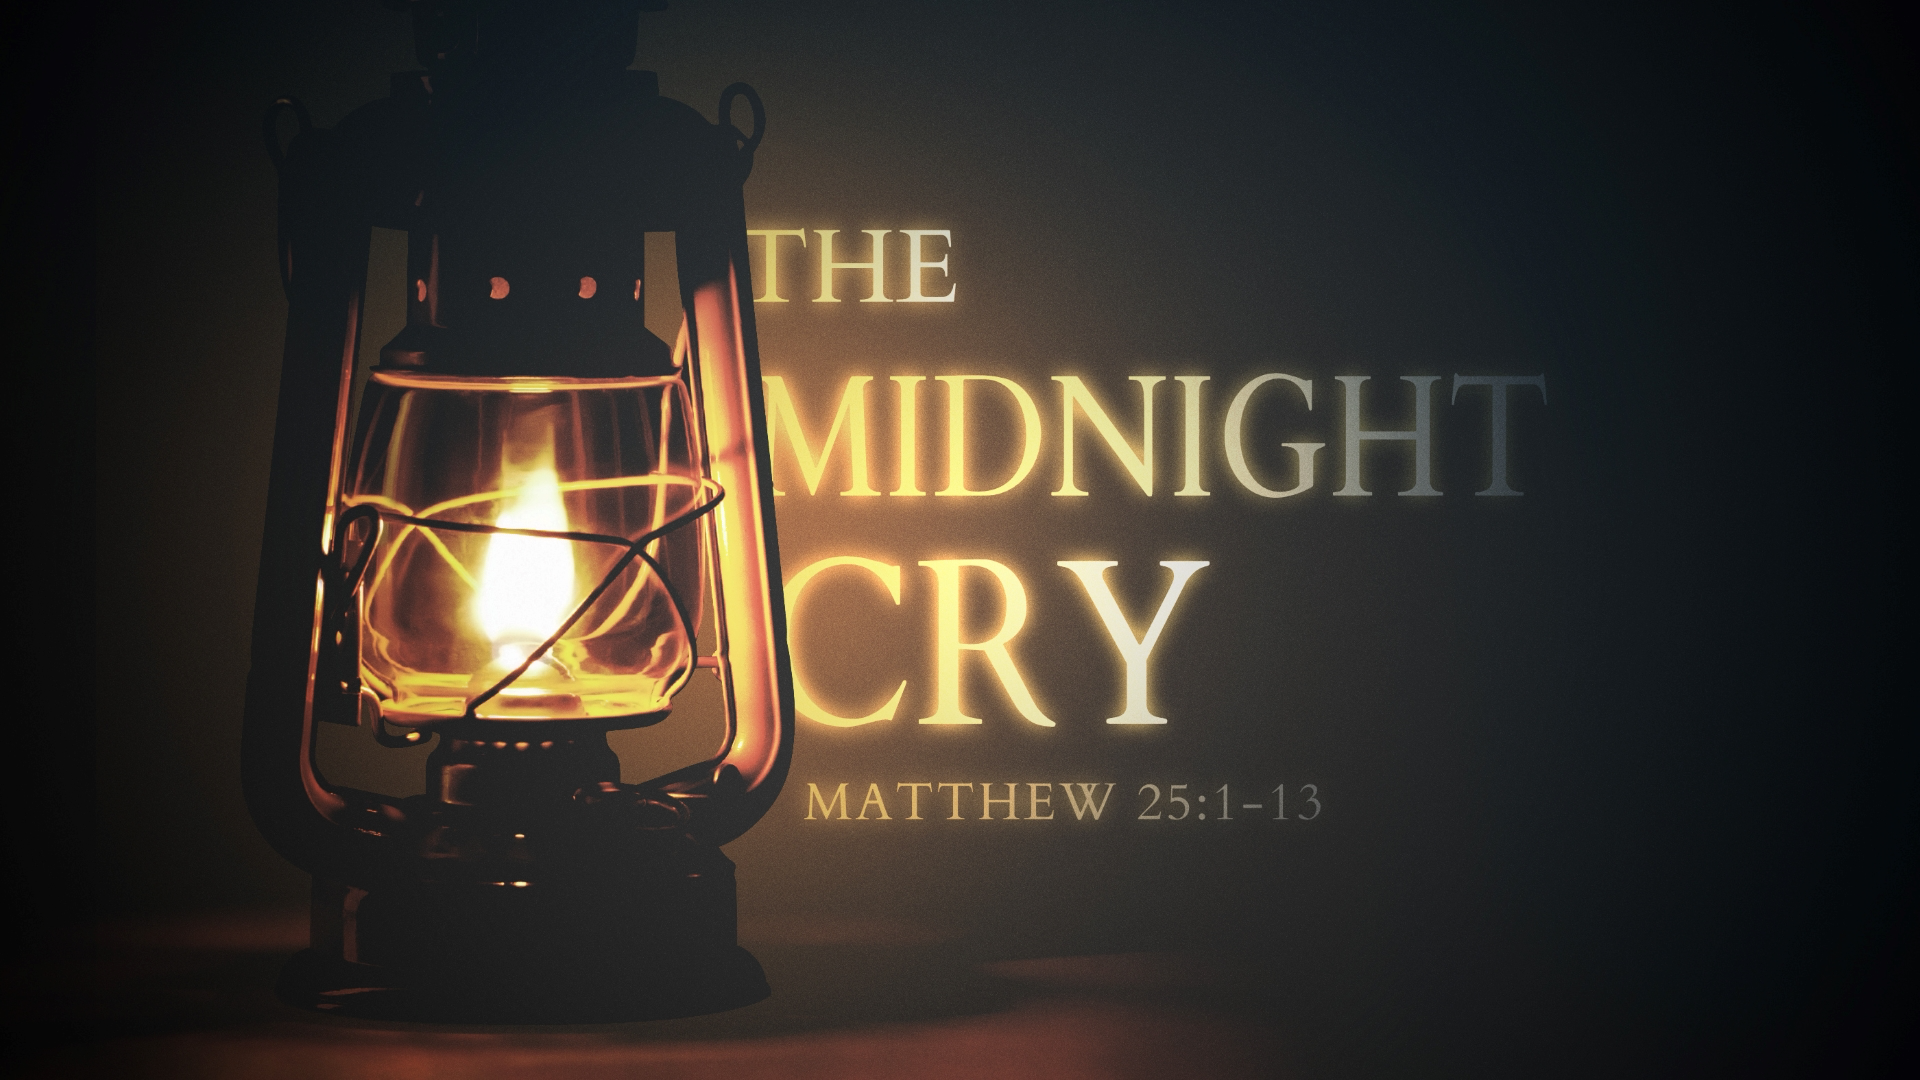 0 - 21.10.3a - Matthew 25.1-13 - The Midnight Cry - Title.png